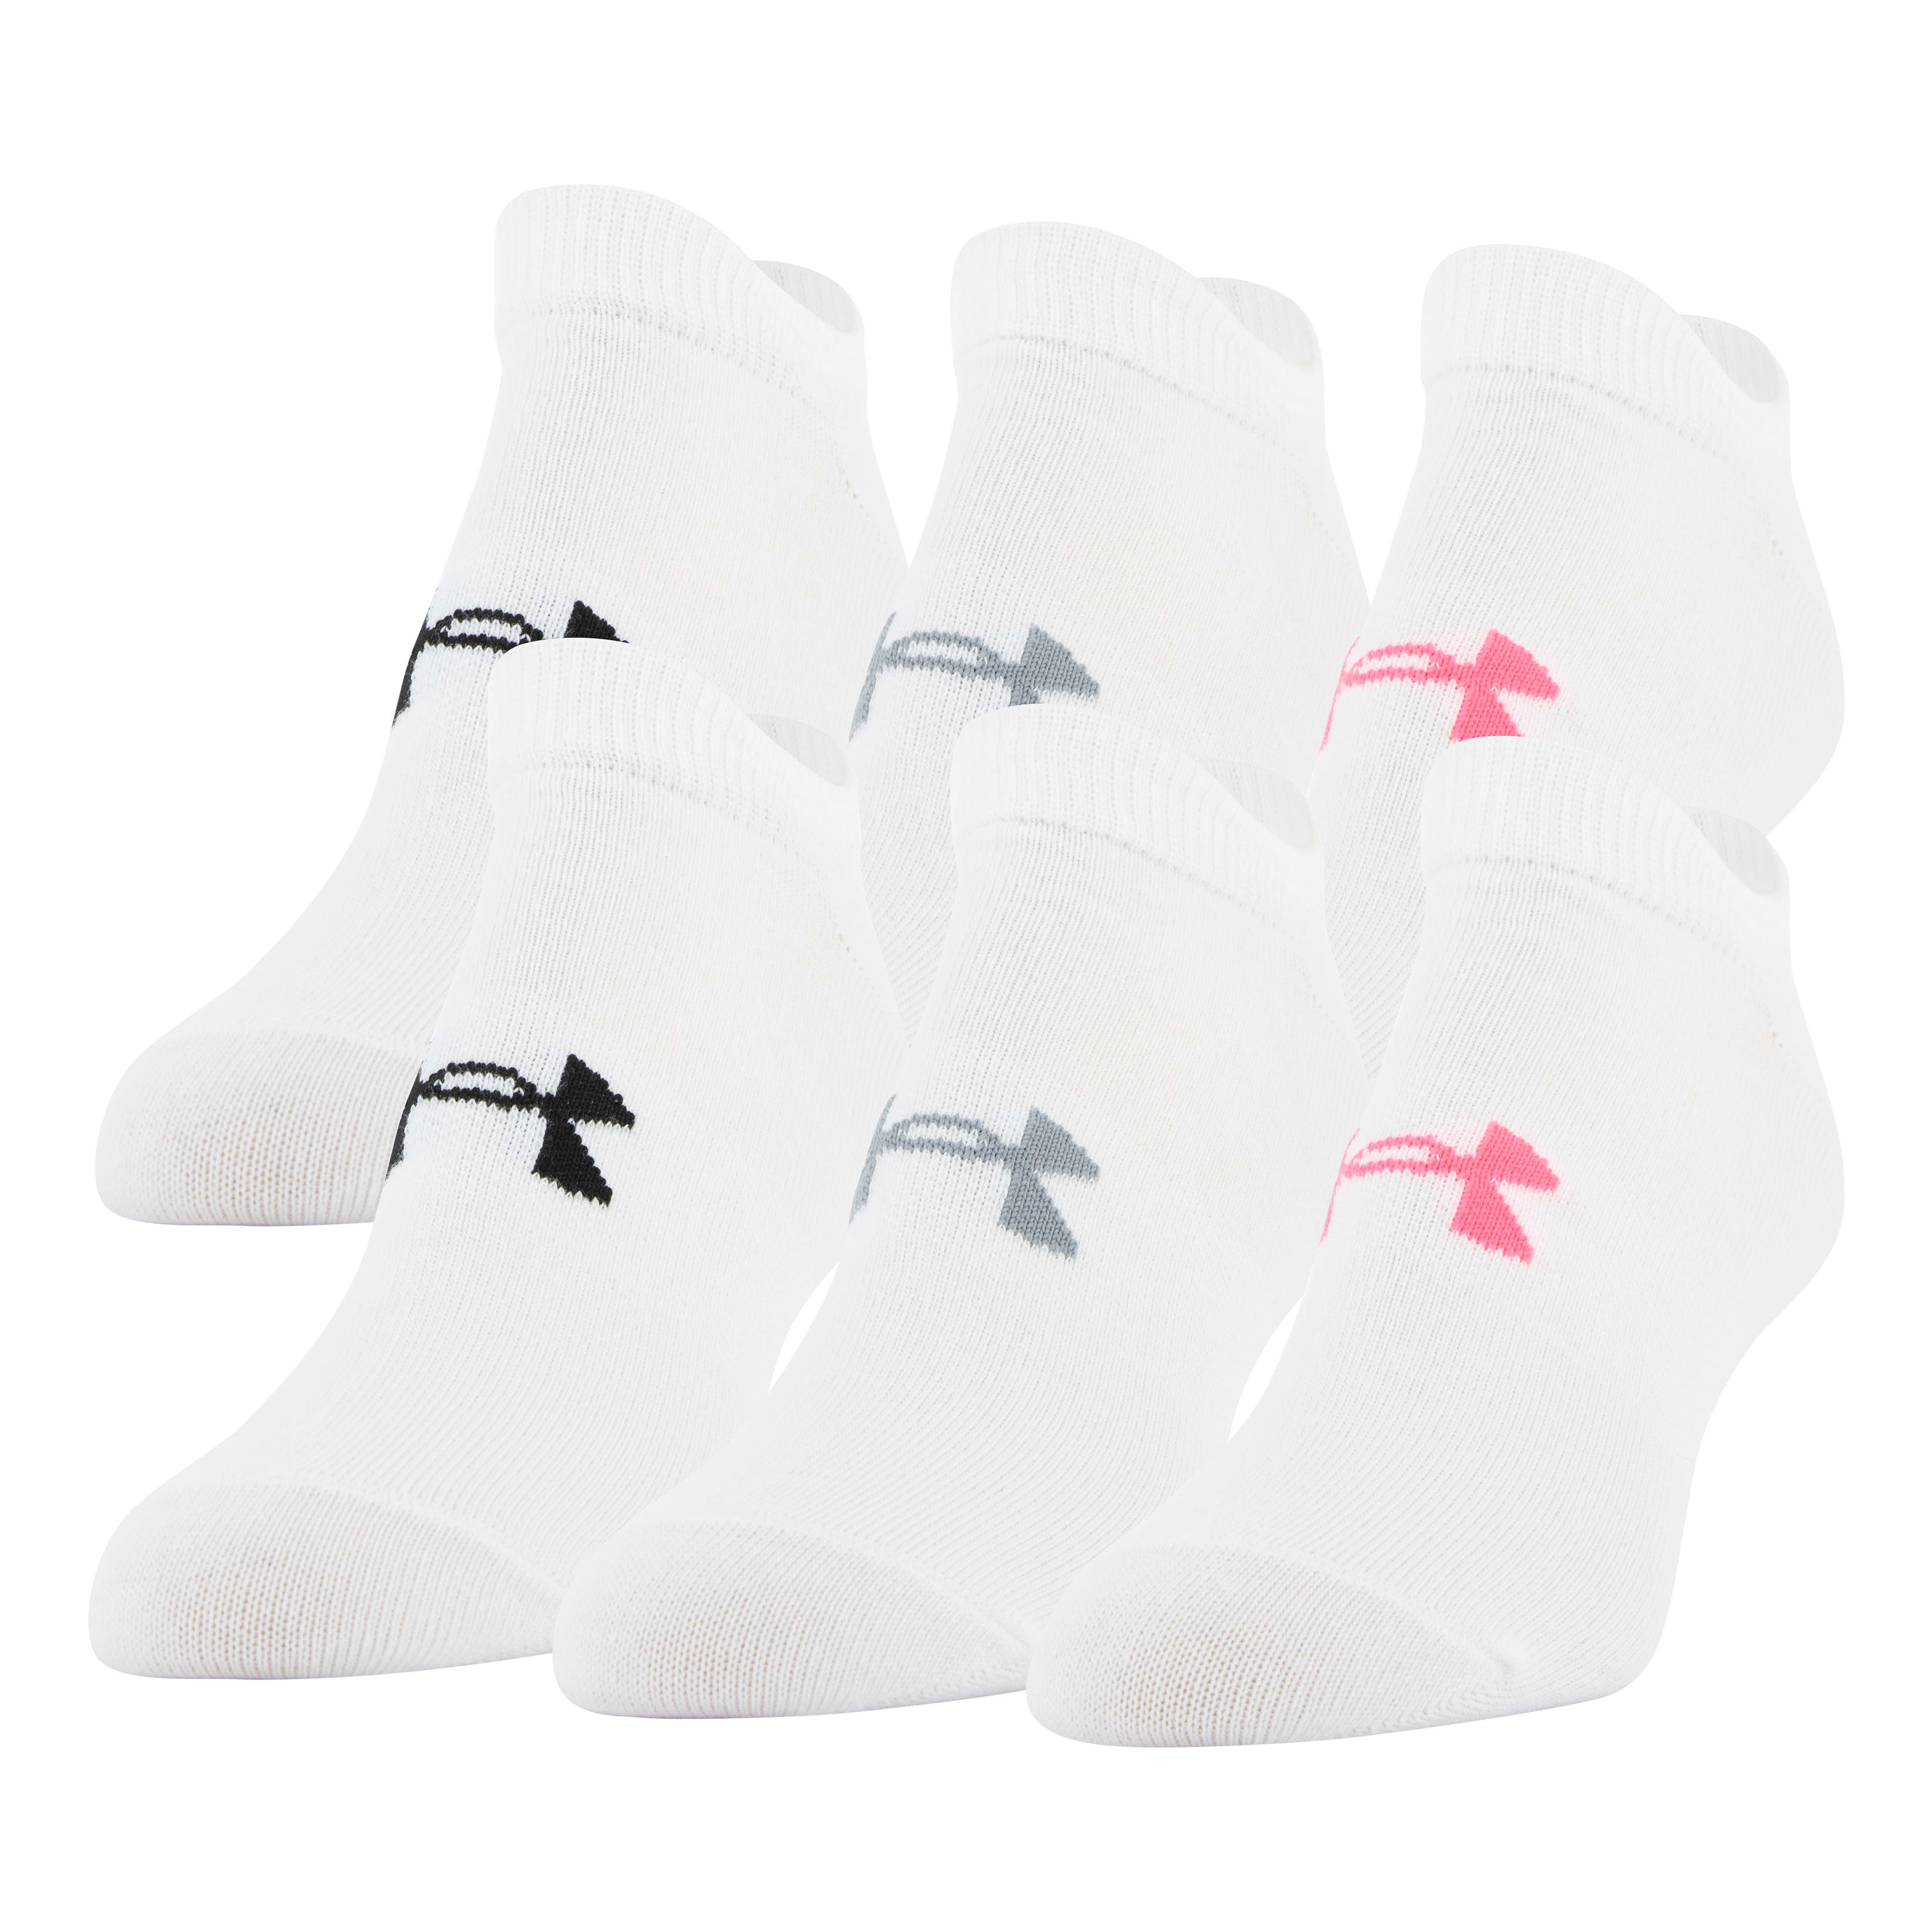 Under Armour® Women's No Show 6-Pack Socks - White